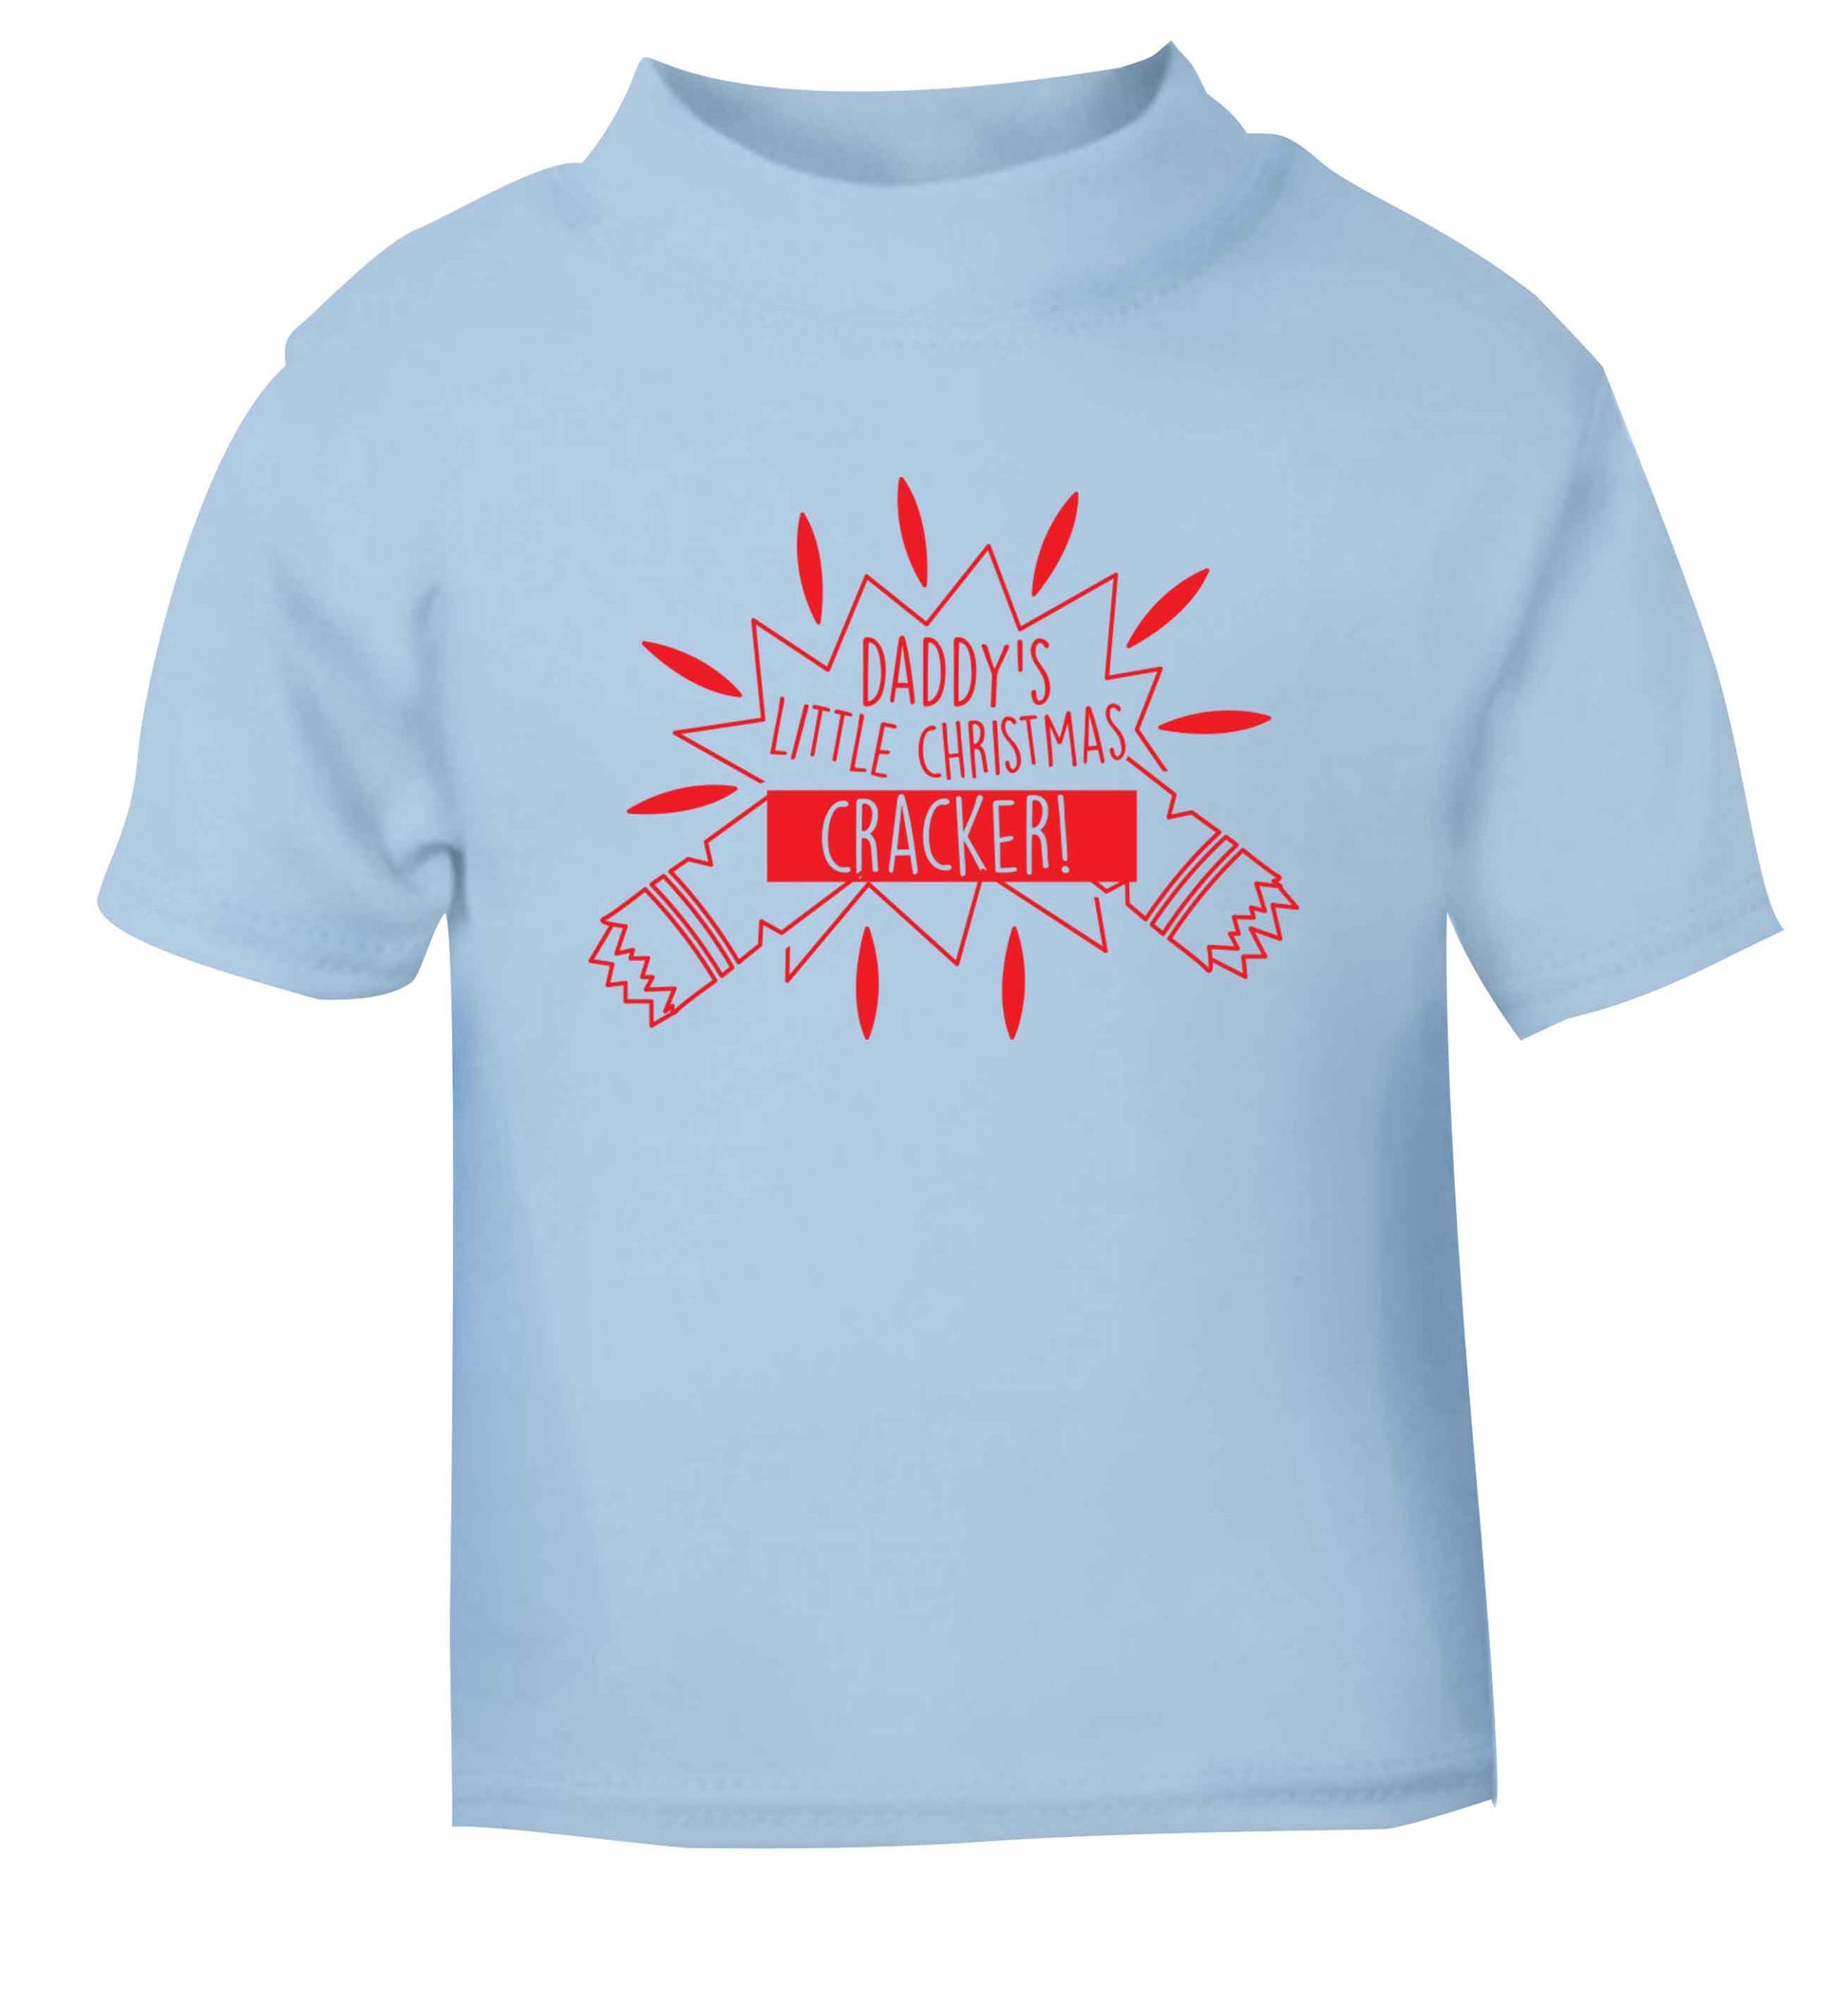 Daddy's little Christmas cracker light blue Baby Toddler Tshirt 2 Years